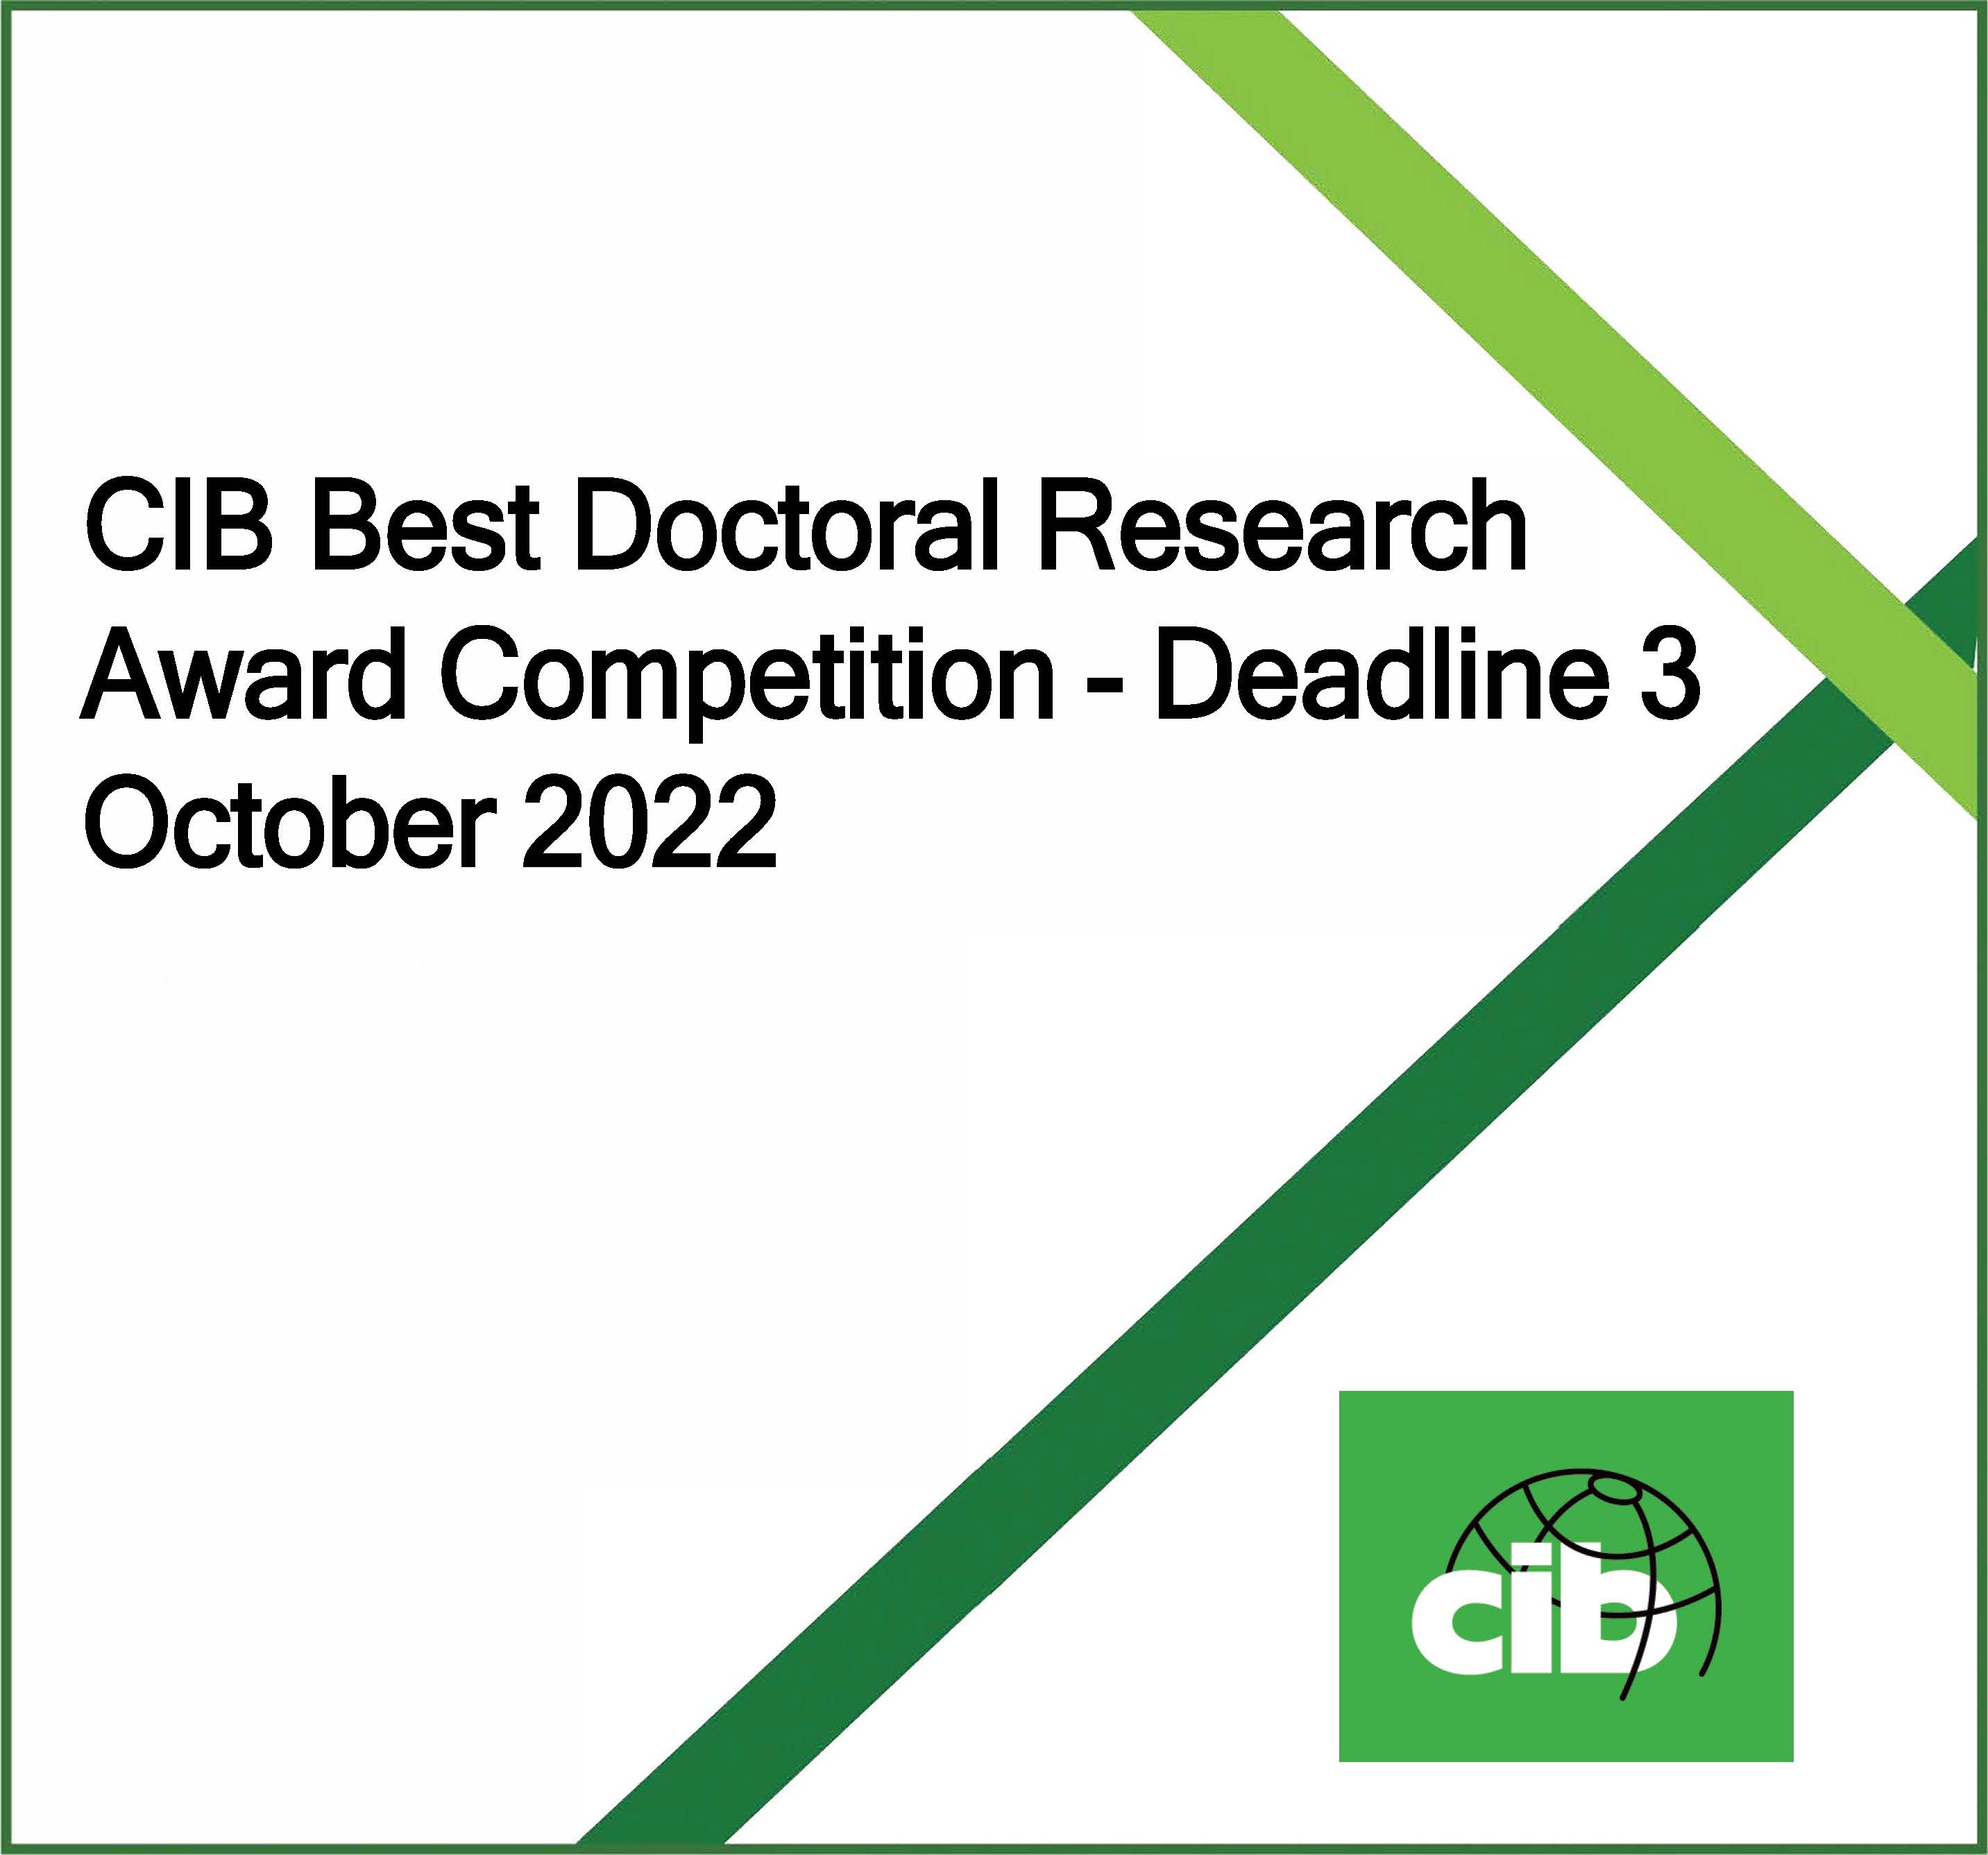 CIB Best Doctoral Research Award Competition – Deadline 3 October 2022